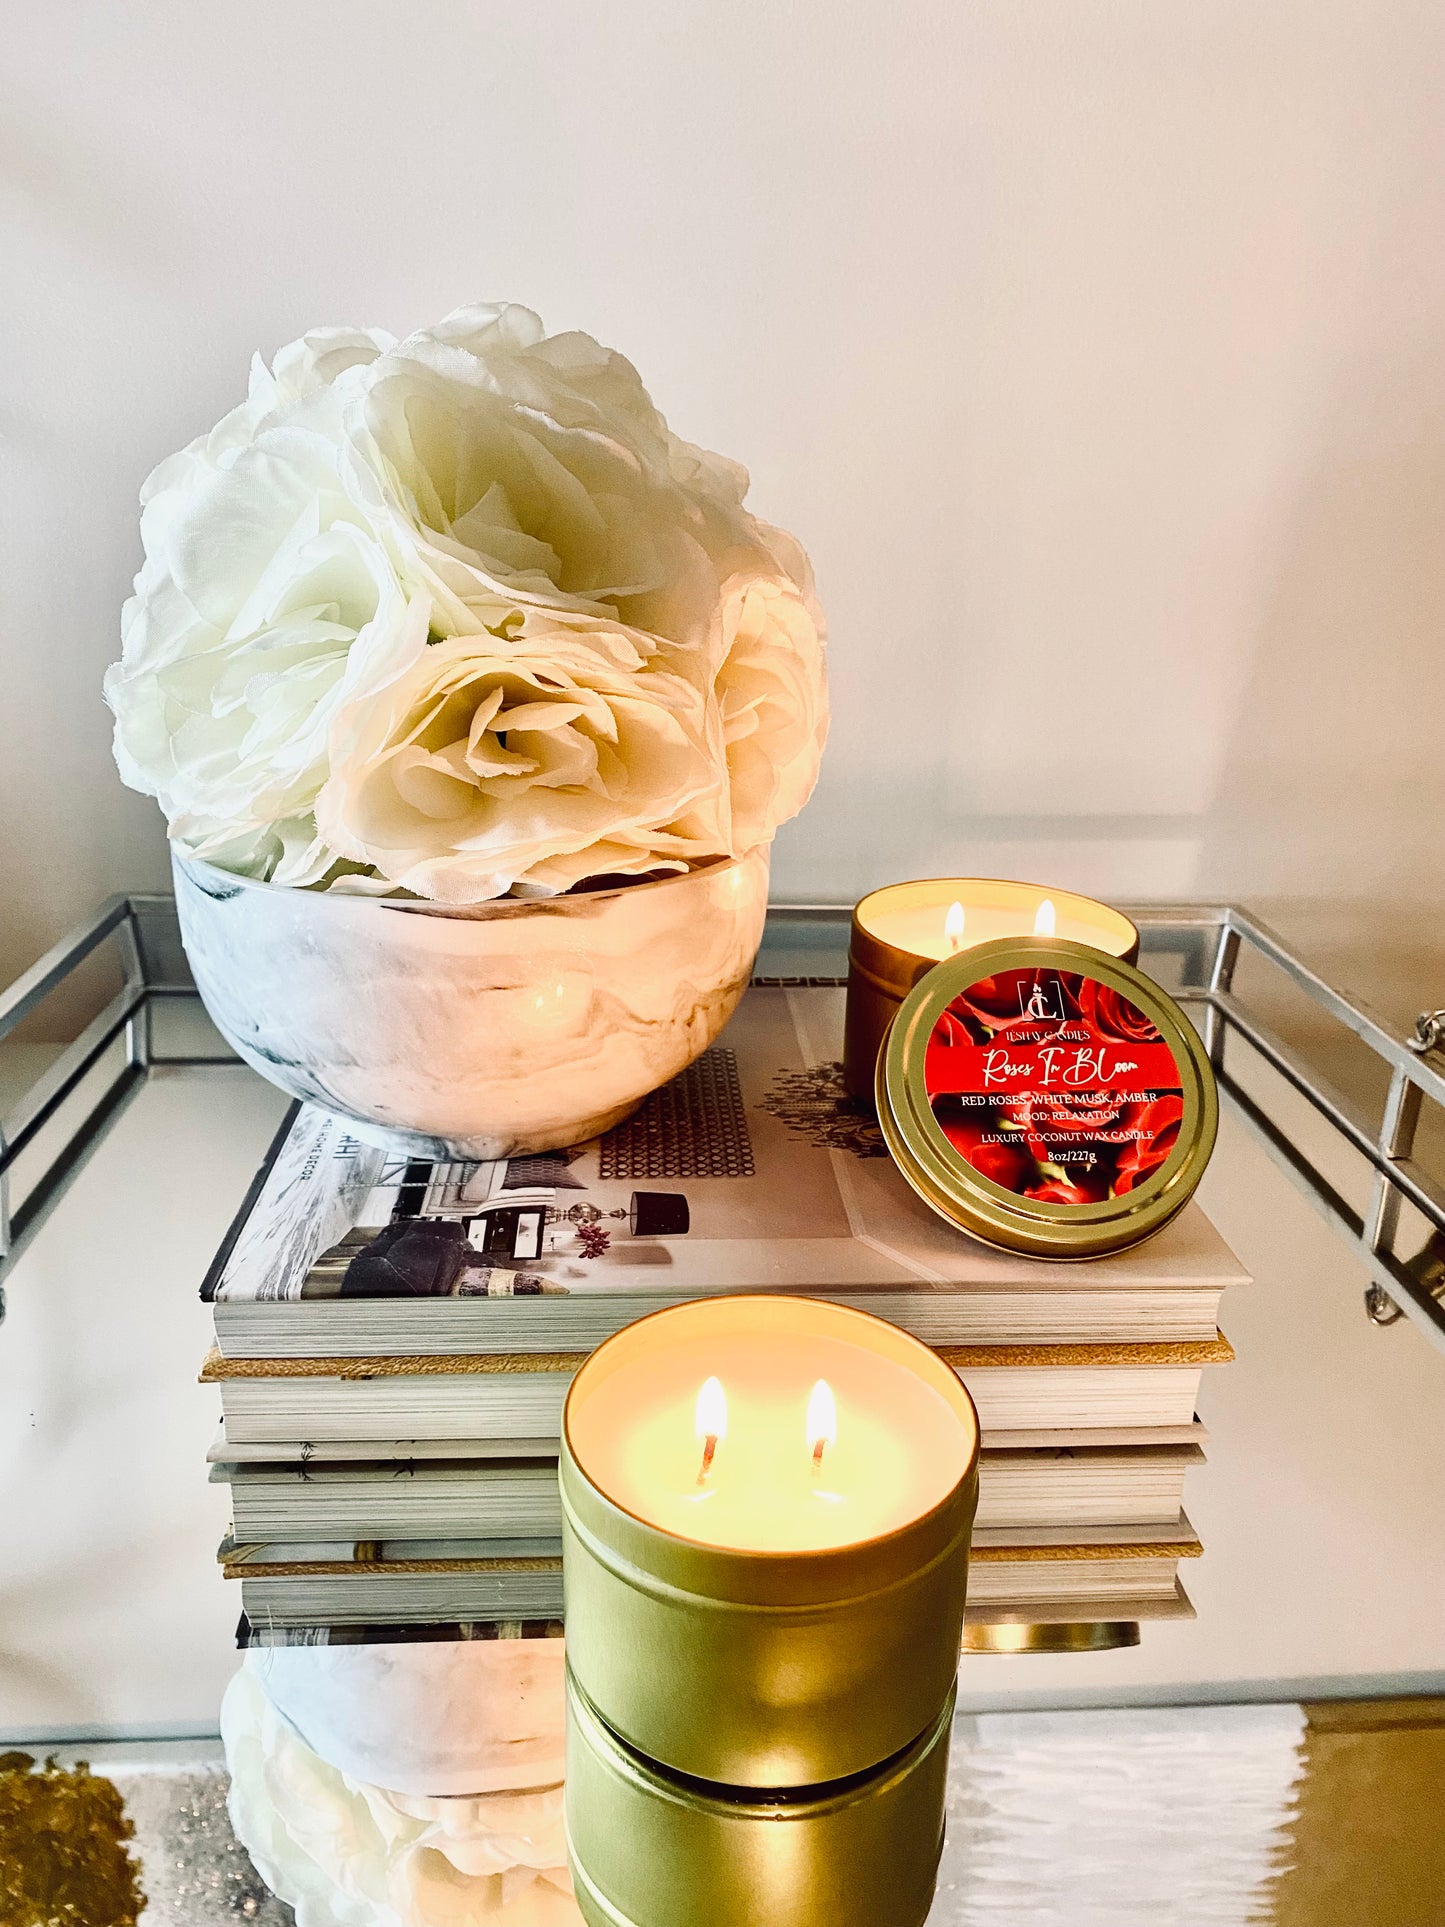 “ROSES IN BLOOM” LUXURY TRAVEL TIN CANDLE